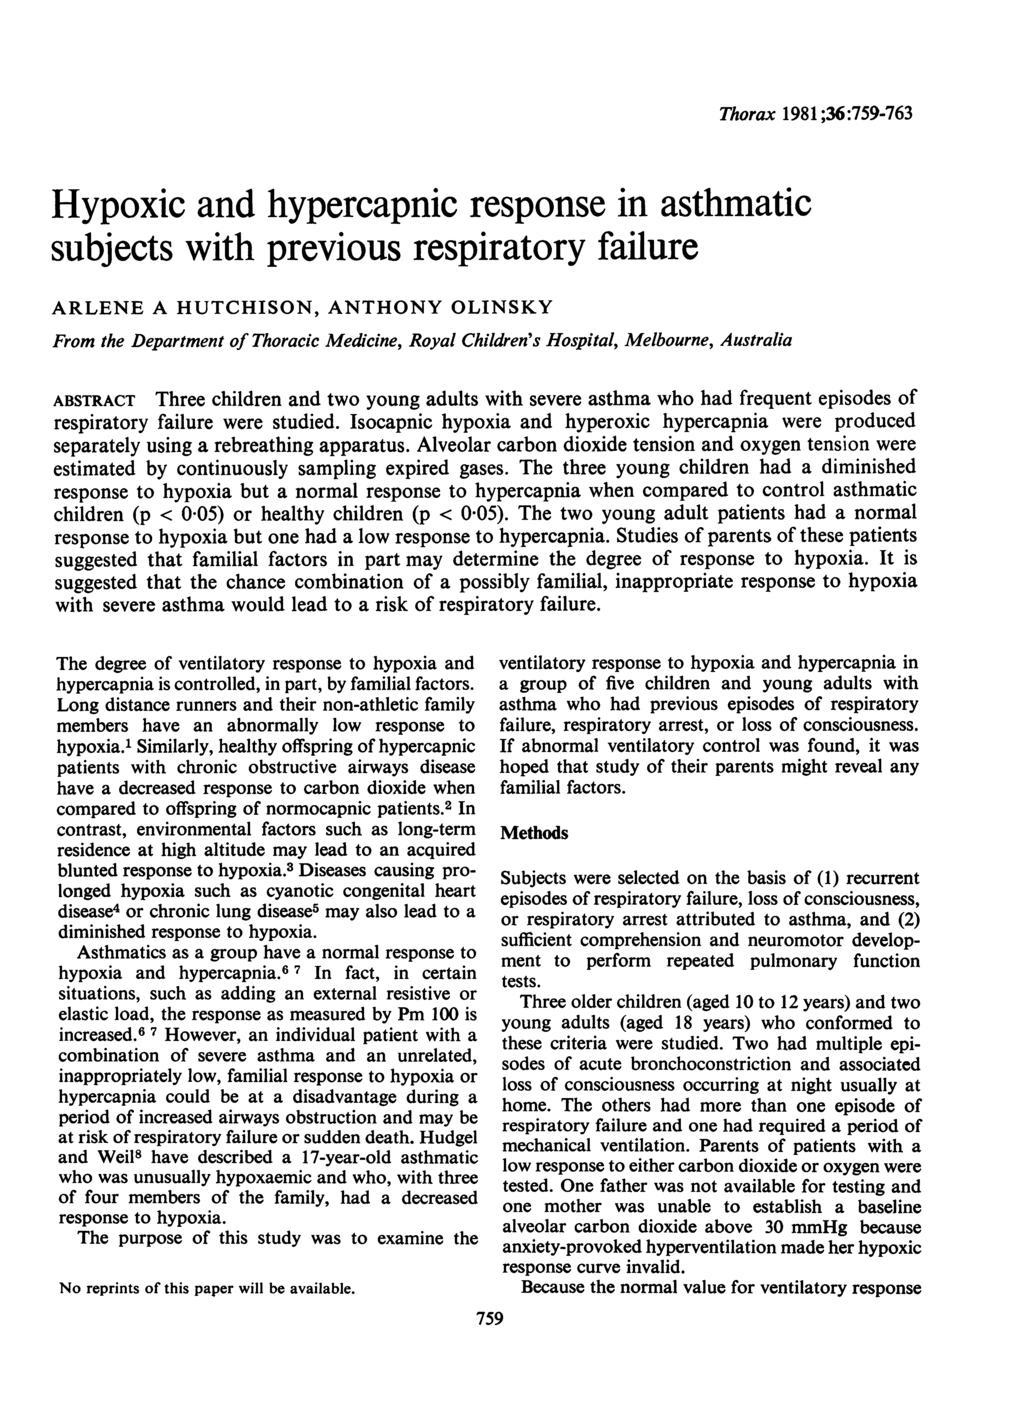 Hypoxic and hypercapnic response in asthmatic subjects with previous respiratory failure ARLENE A HUTCHISON, ANTHONY OLINSKY From the Department of Thoracic Medicine, Royal Children's Hospital,